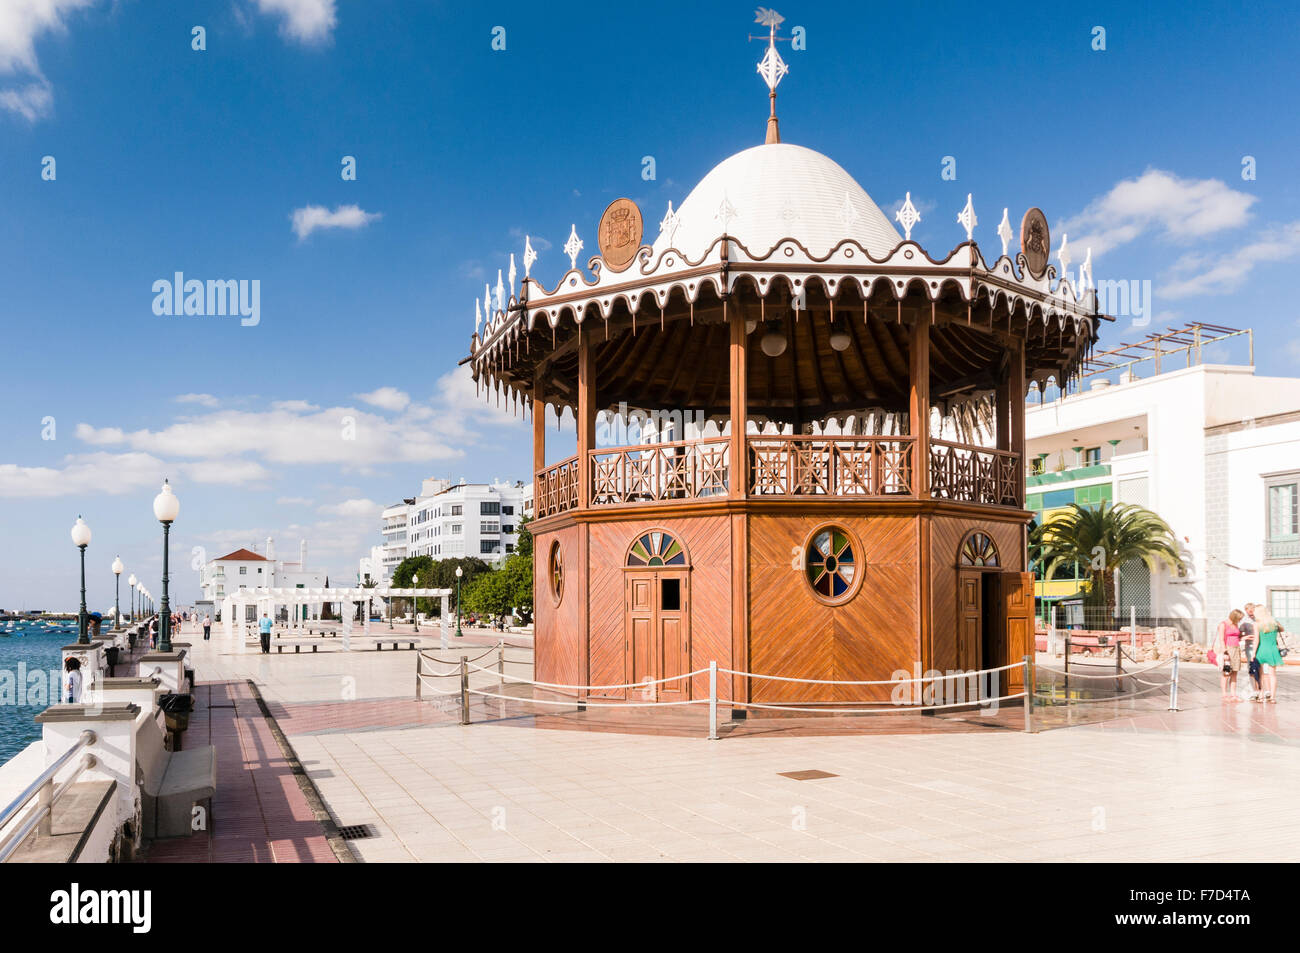 Tourist information office and bandstand in Arrecife, Lanzarote. Stock Photo